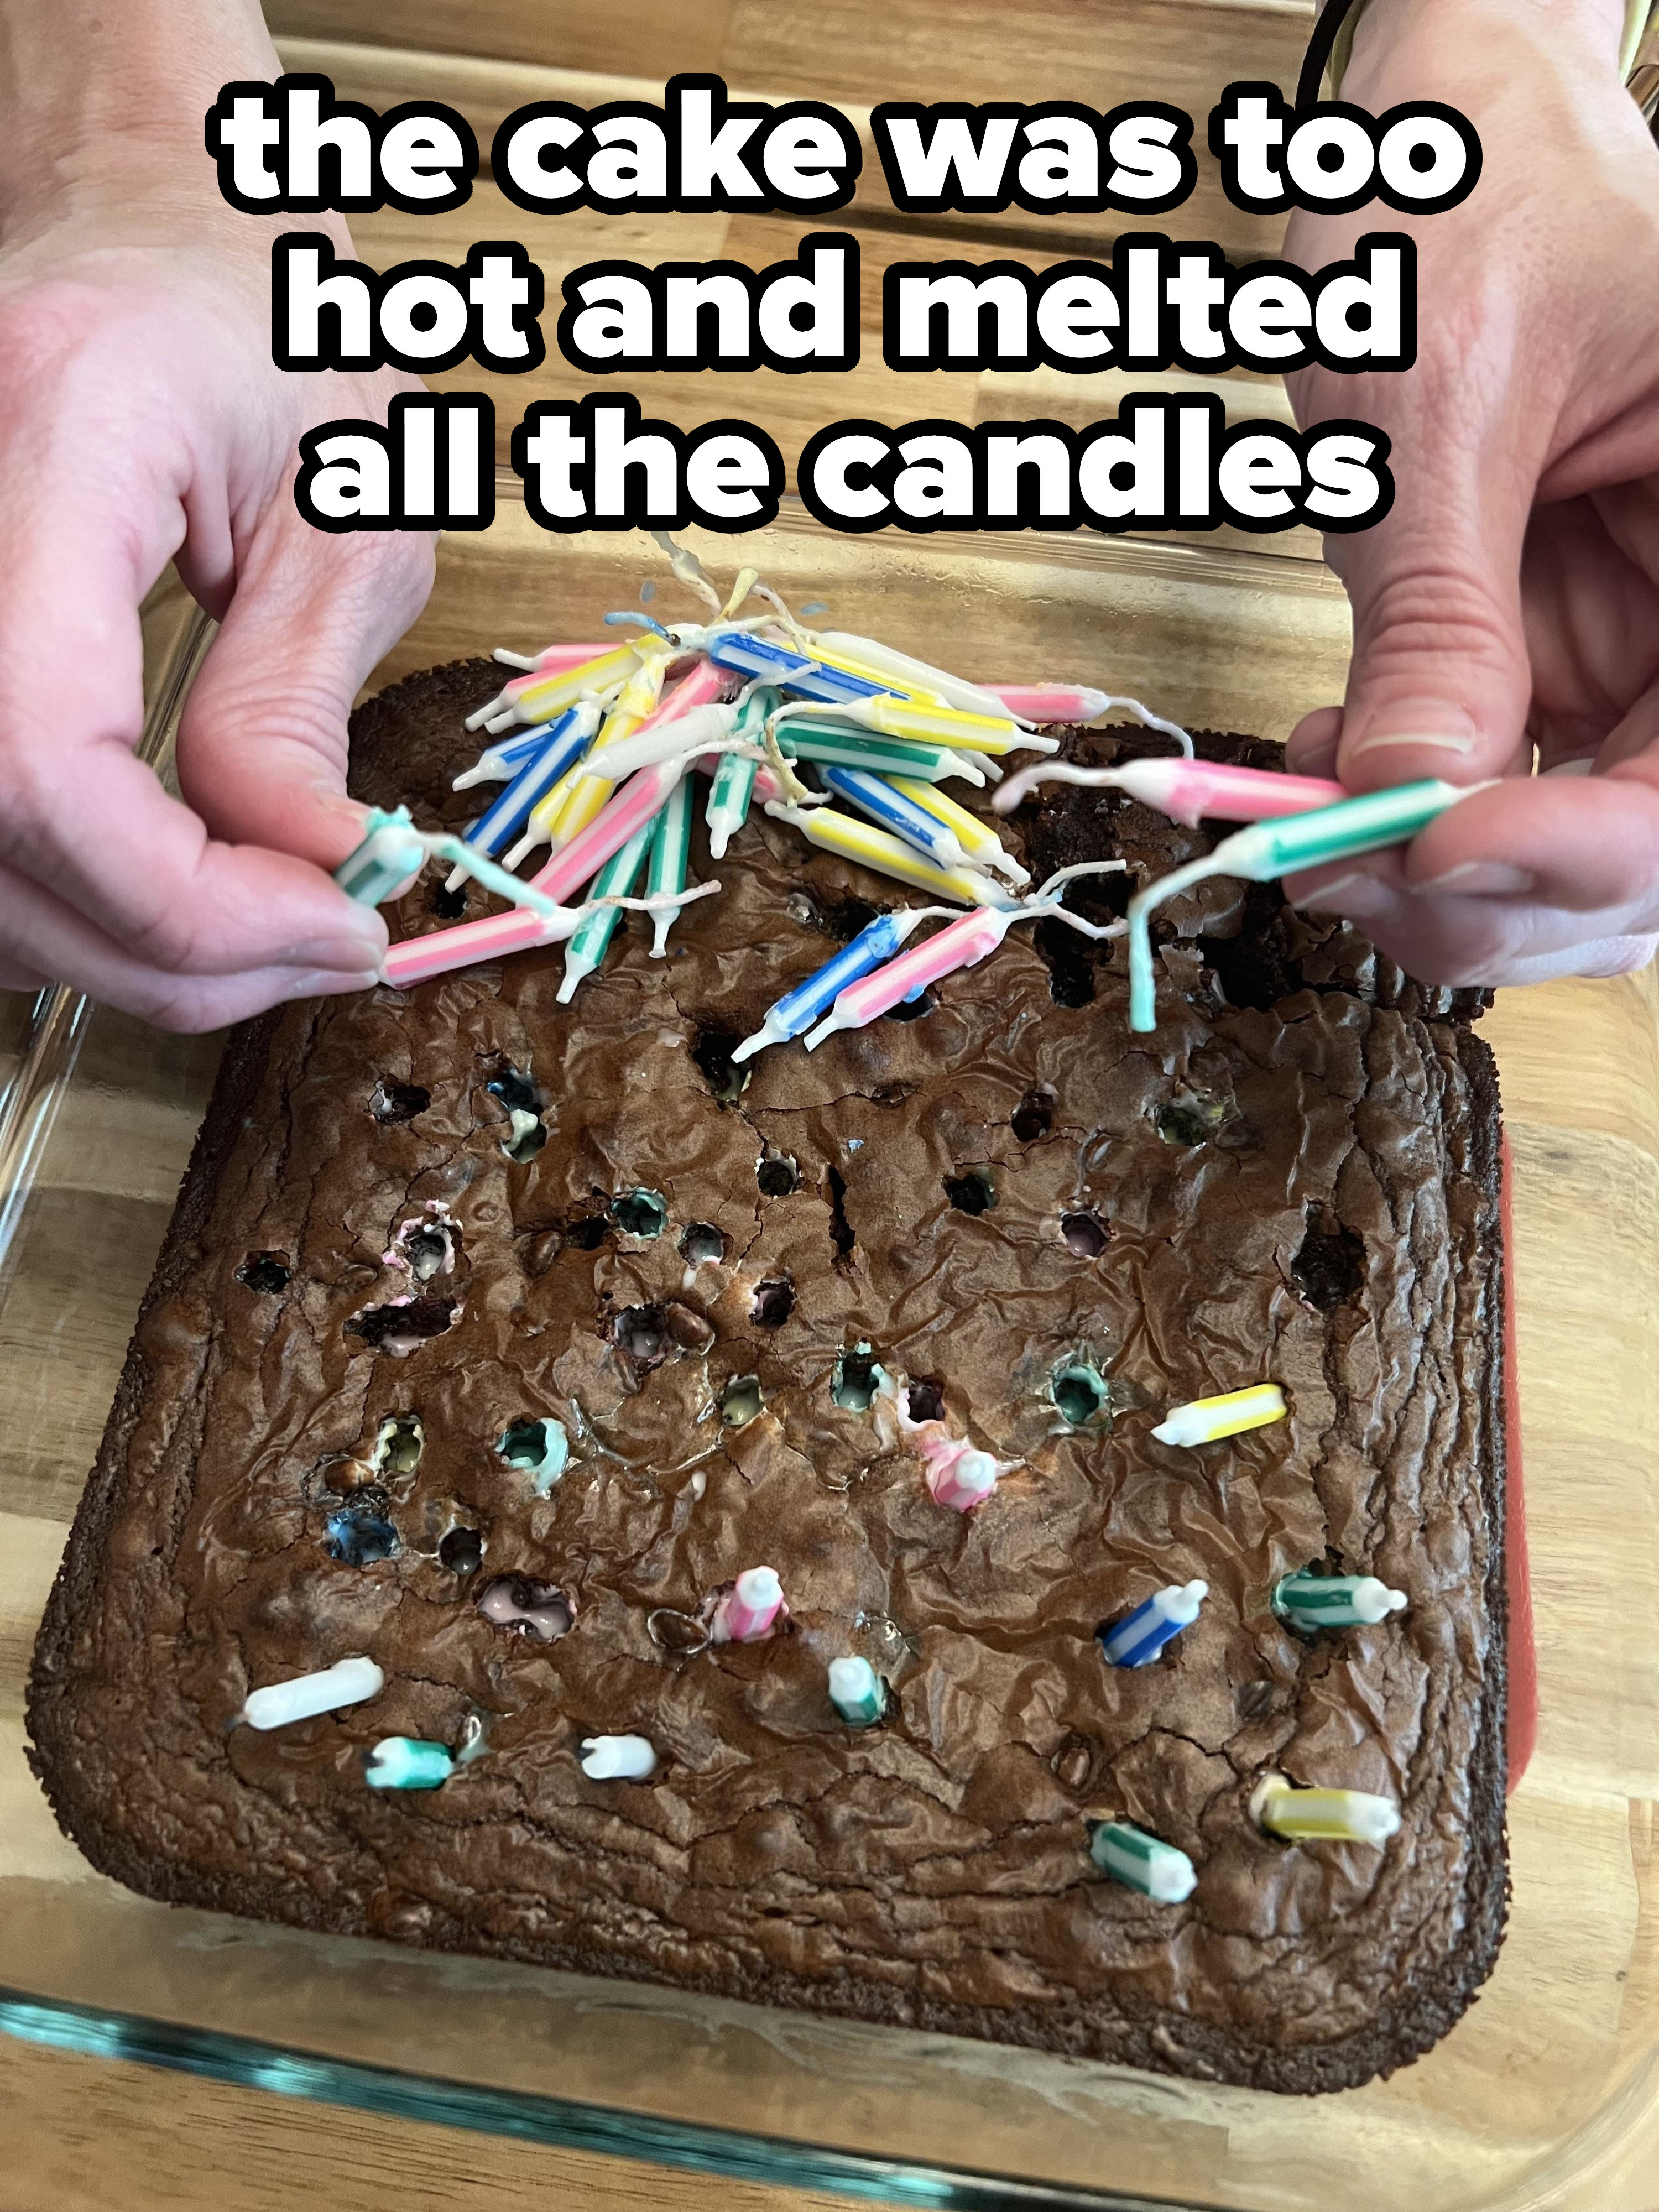 Candles melted into a cake